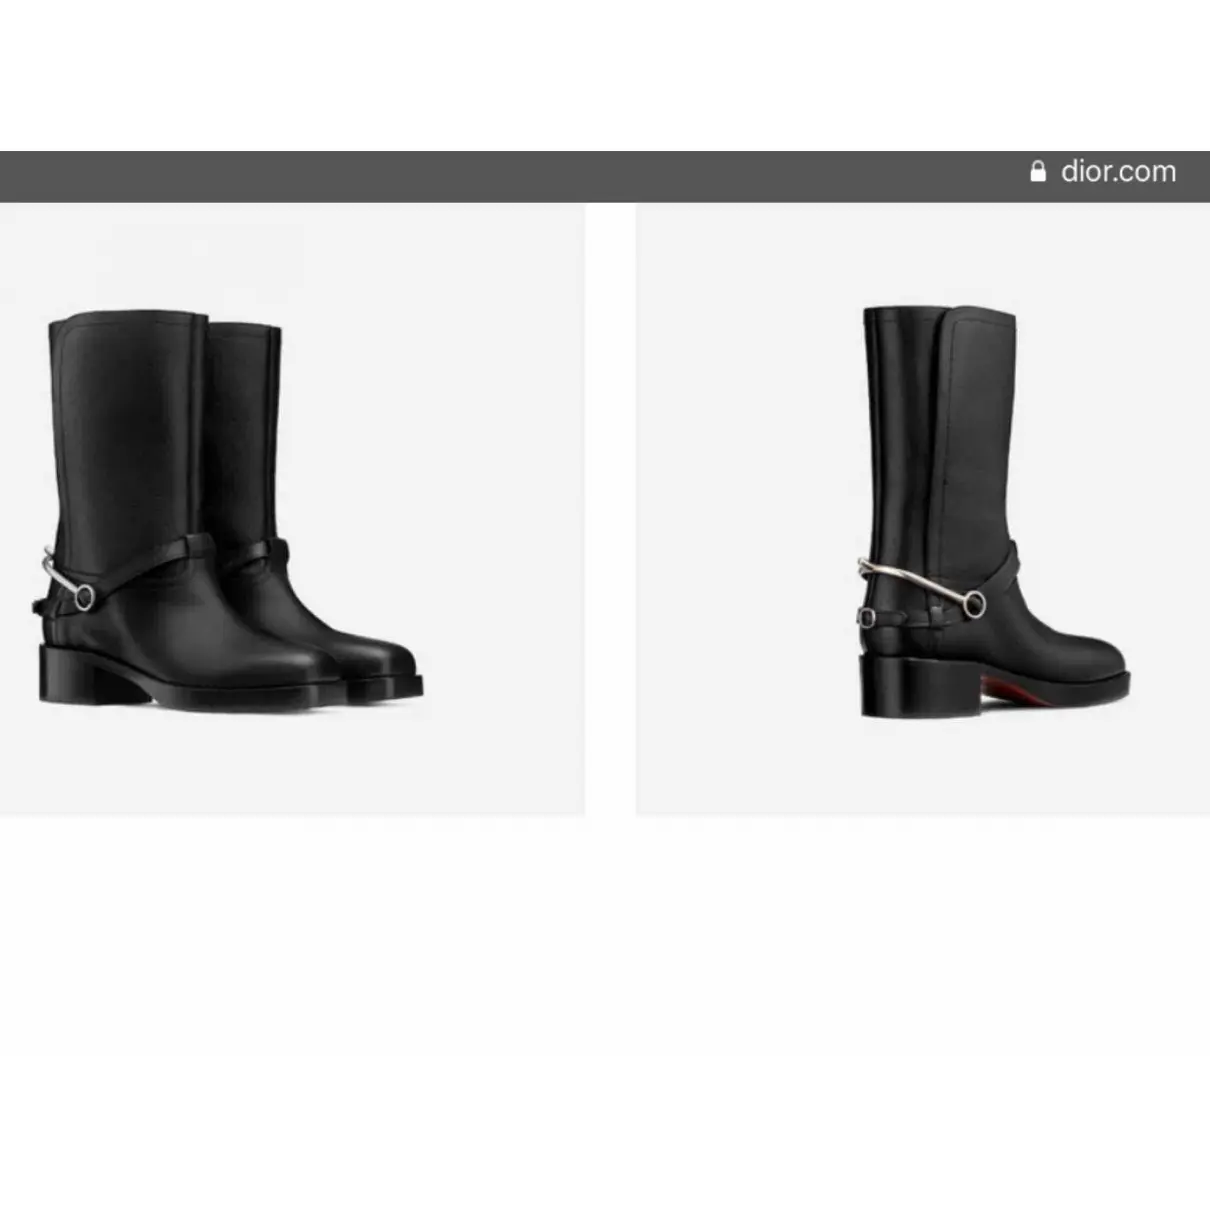 Dior Diorider leather riding boots for sale